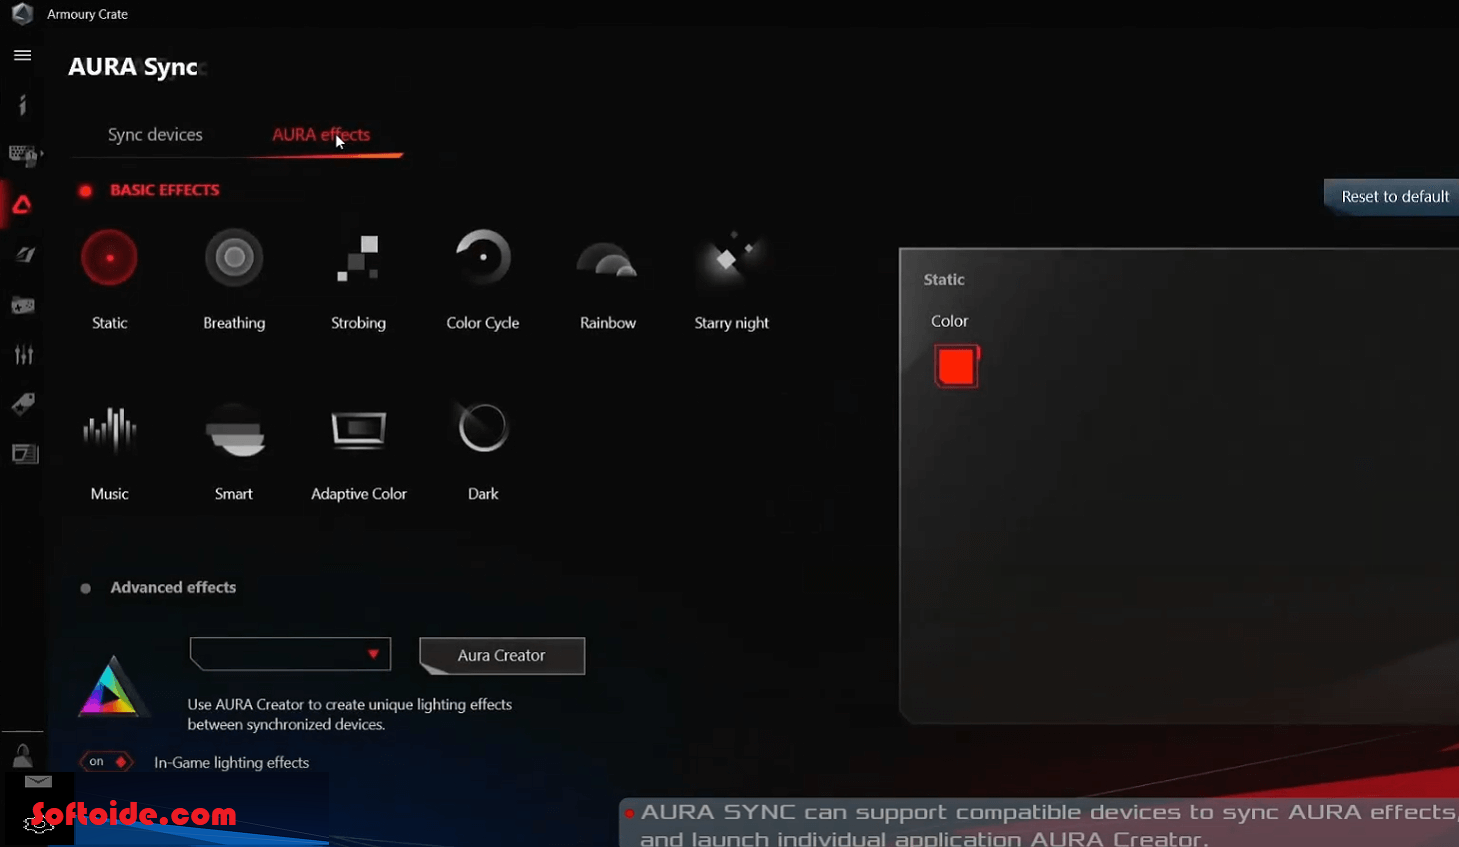 armoury-crate-connect-configure-and-control-a-plethora-of-ROG-gaming-products-screenshot-04